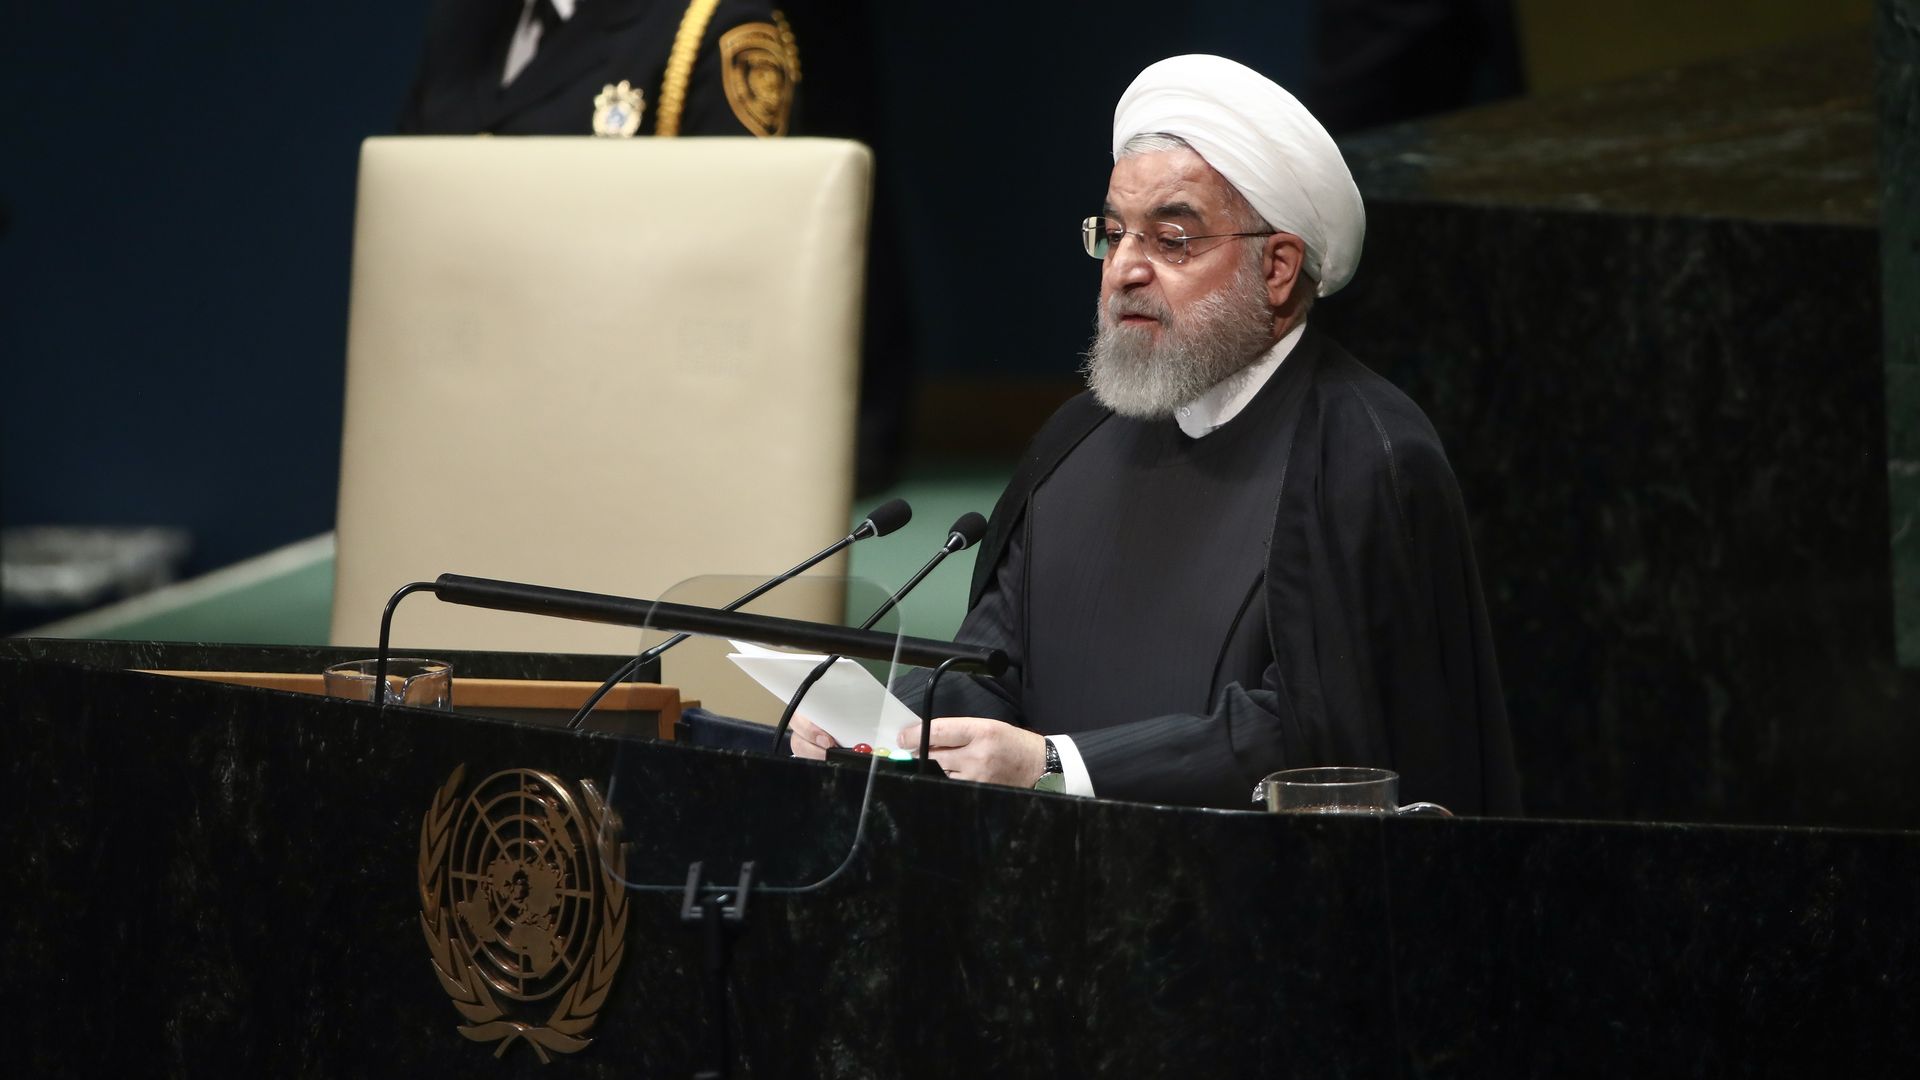 Hassan Rouhani speaking to the United Nations General Assembly from a lectern